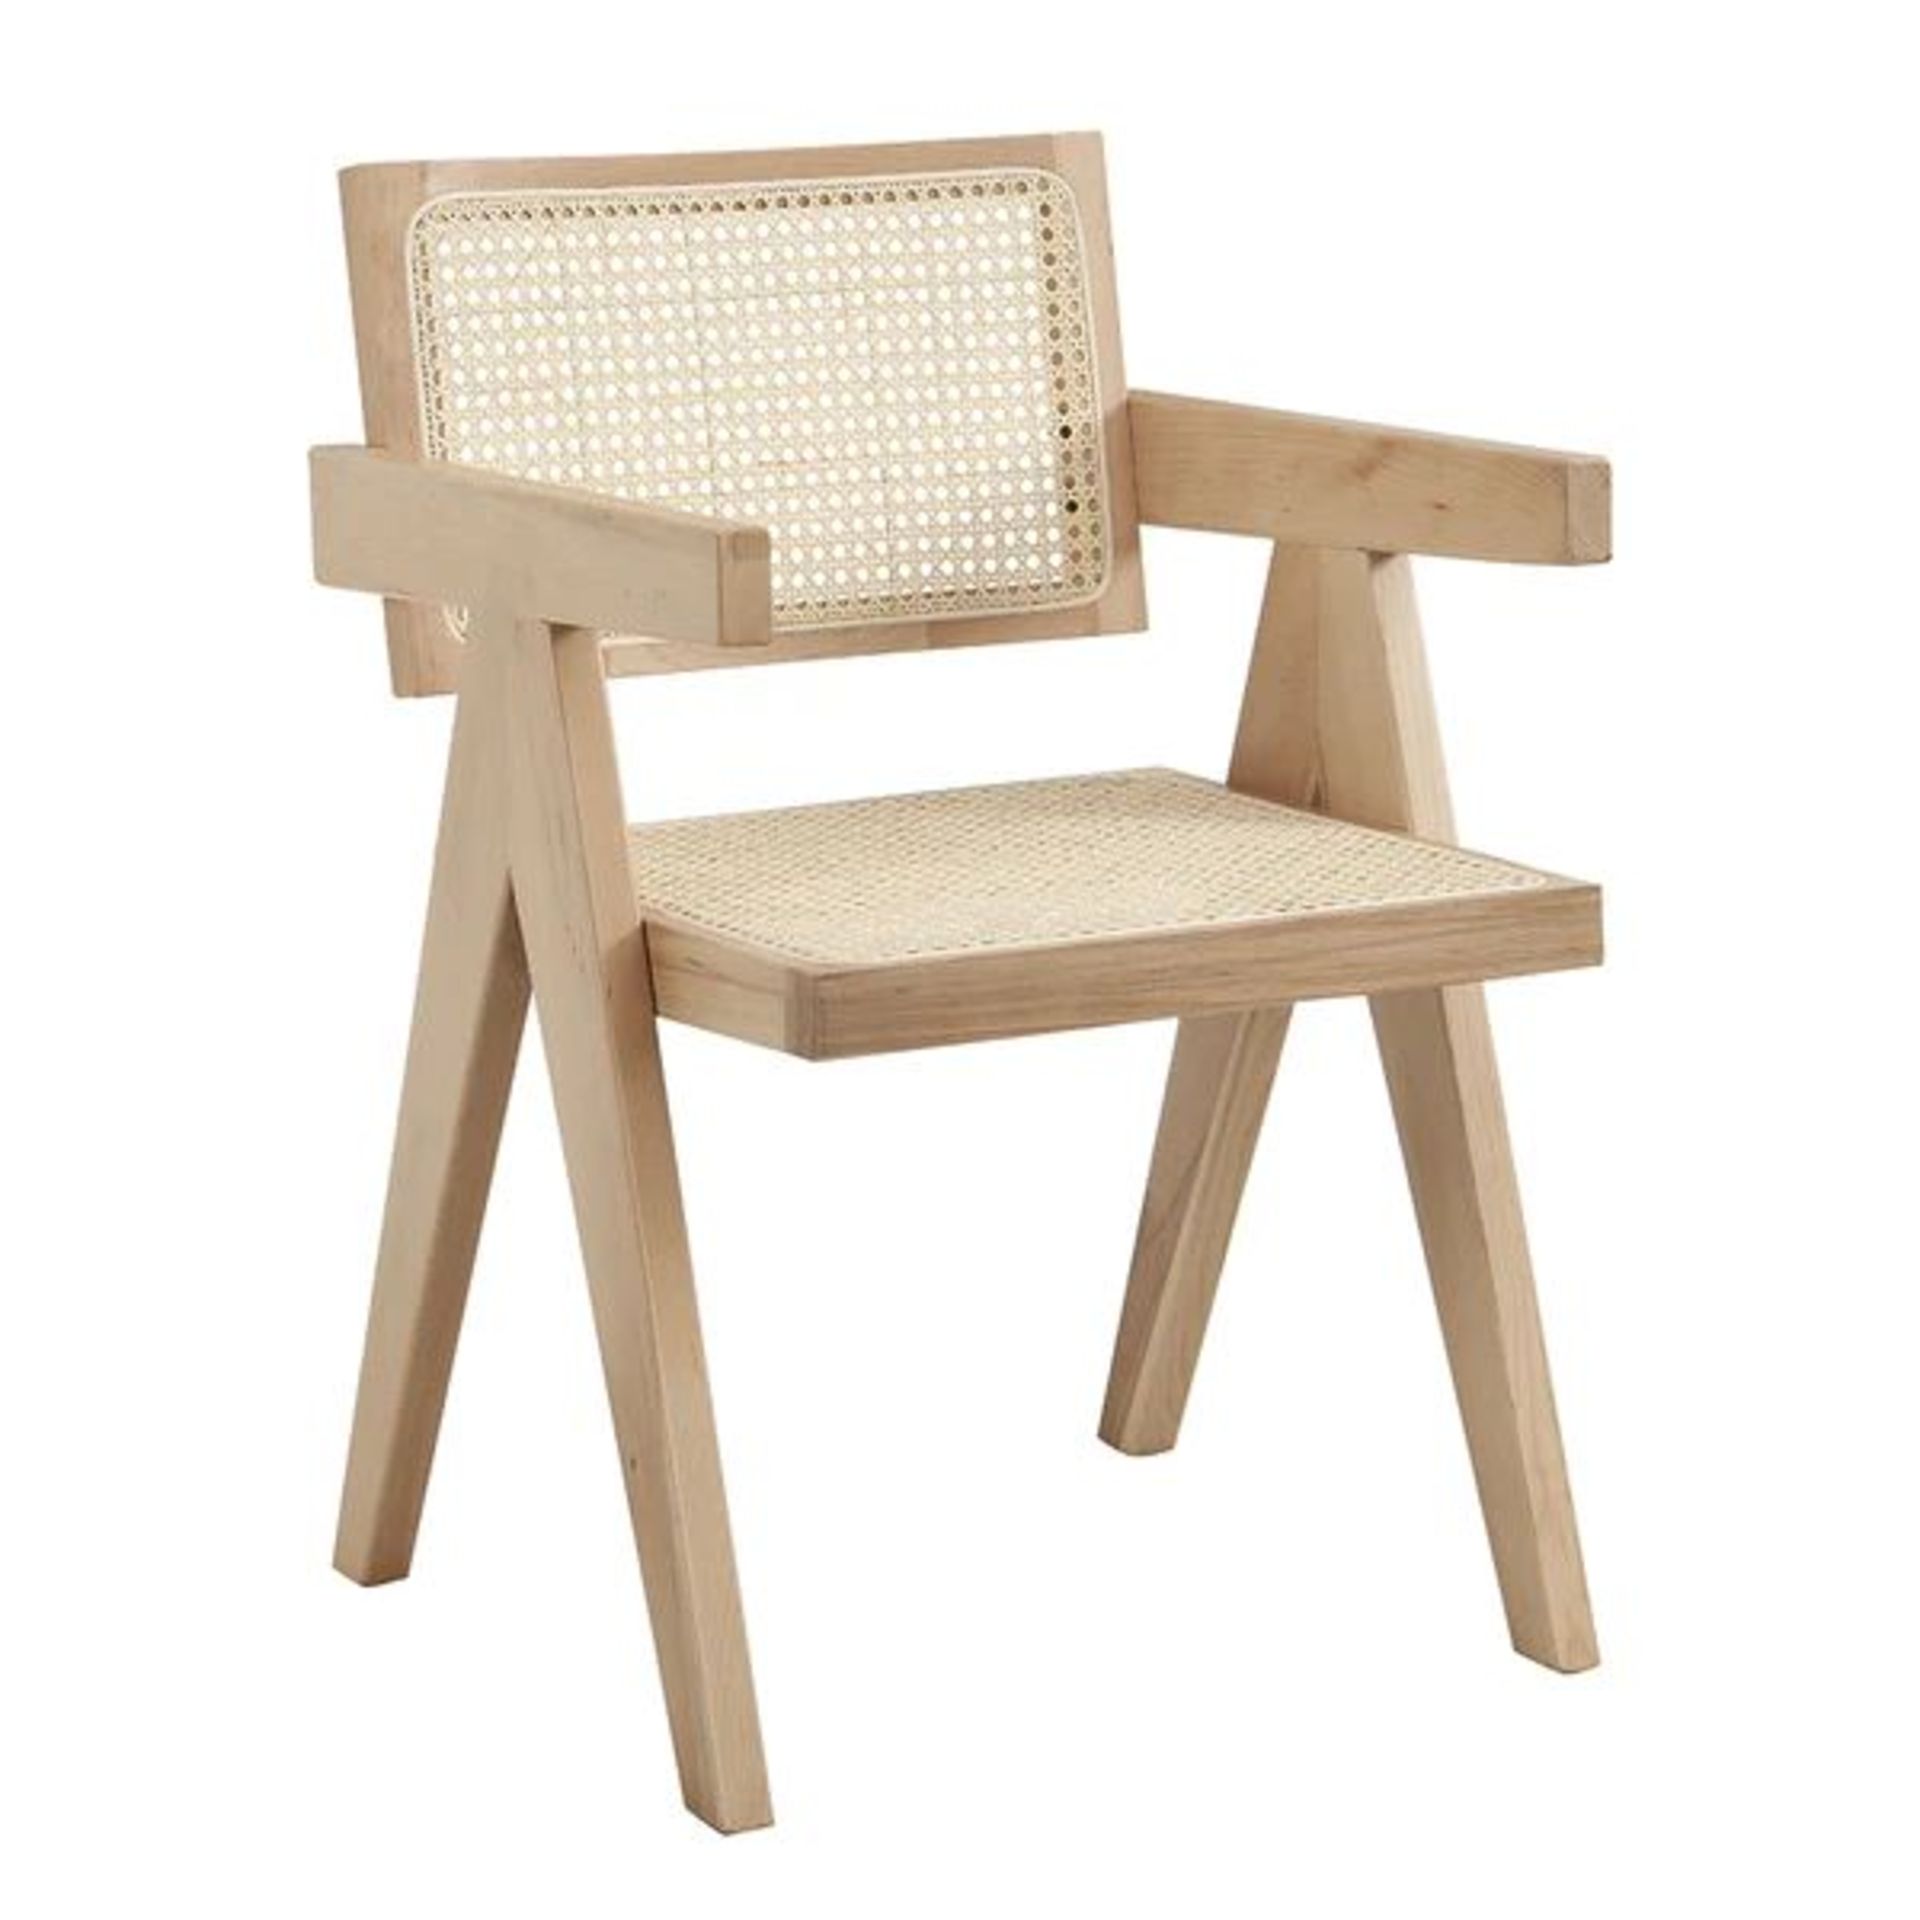 Jeanne Natural Colour Cane Rattan Solid Beech Wood Dining Chair. -ER31. RRP £209.99. The cane rattan - Bild 2 aus 2